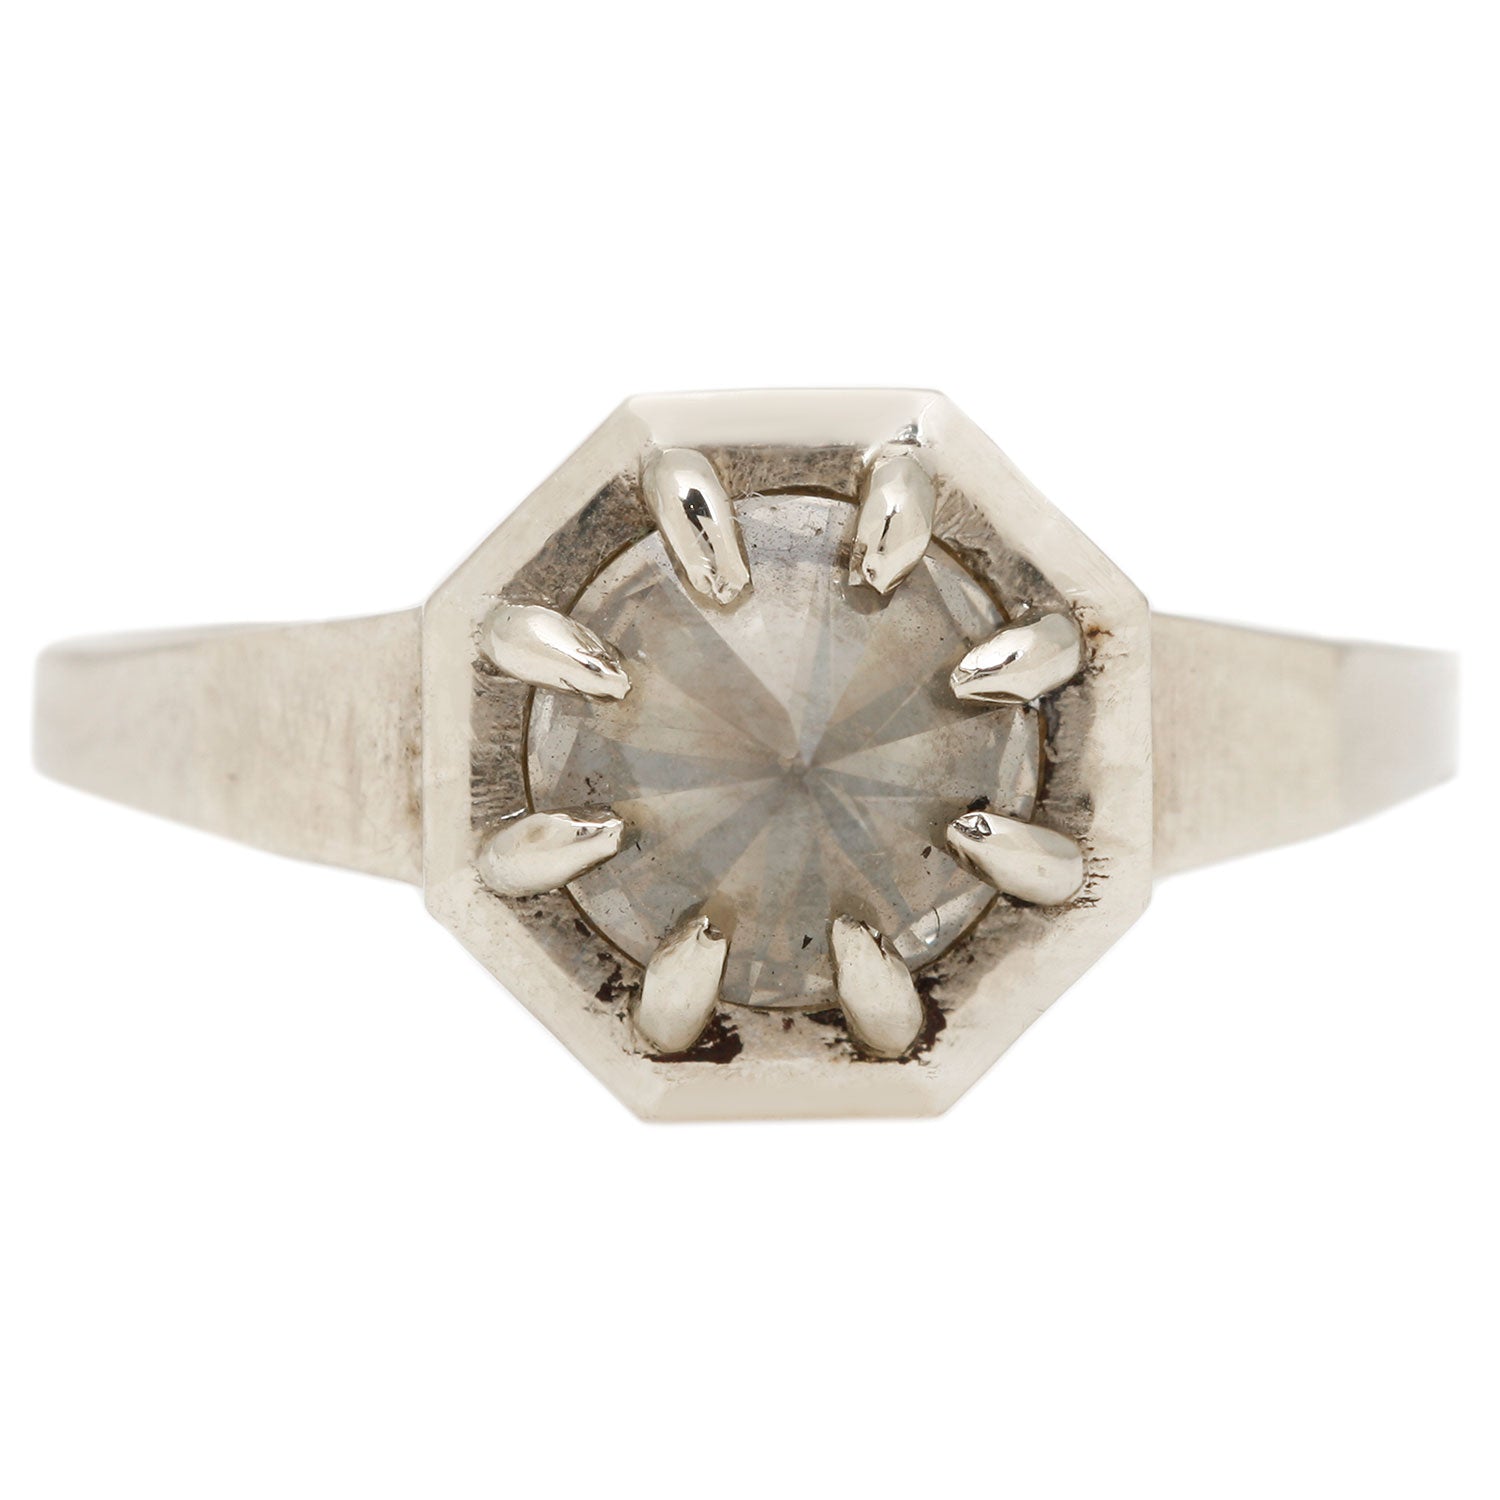 Lauren Wolf Palisade Diamond Solitaire Ring in White Gold